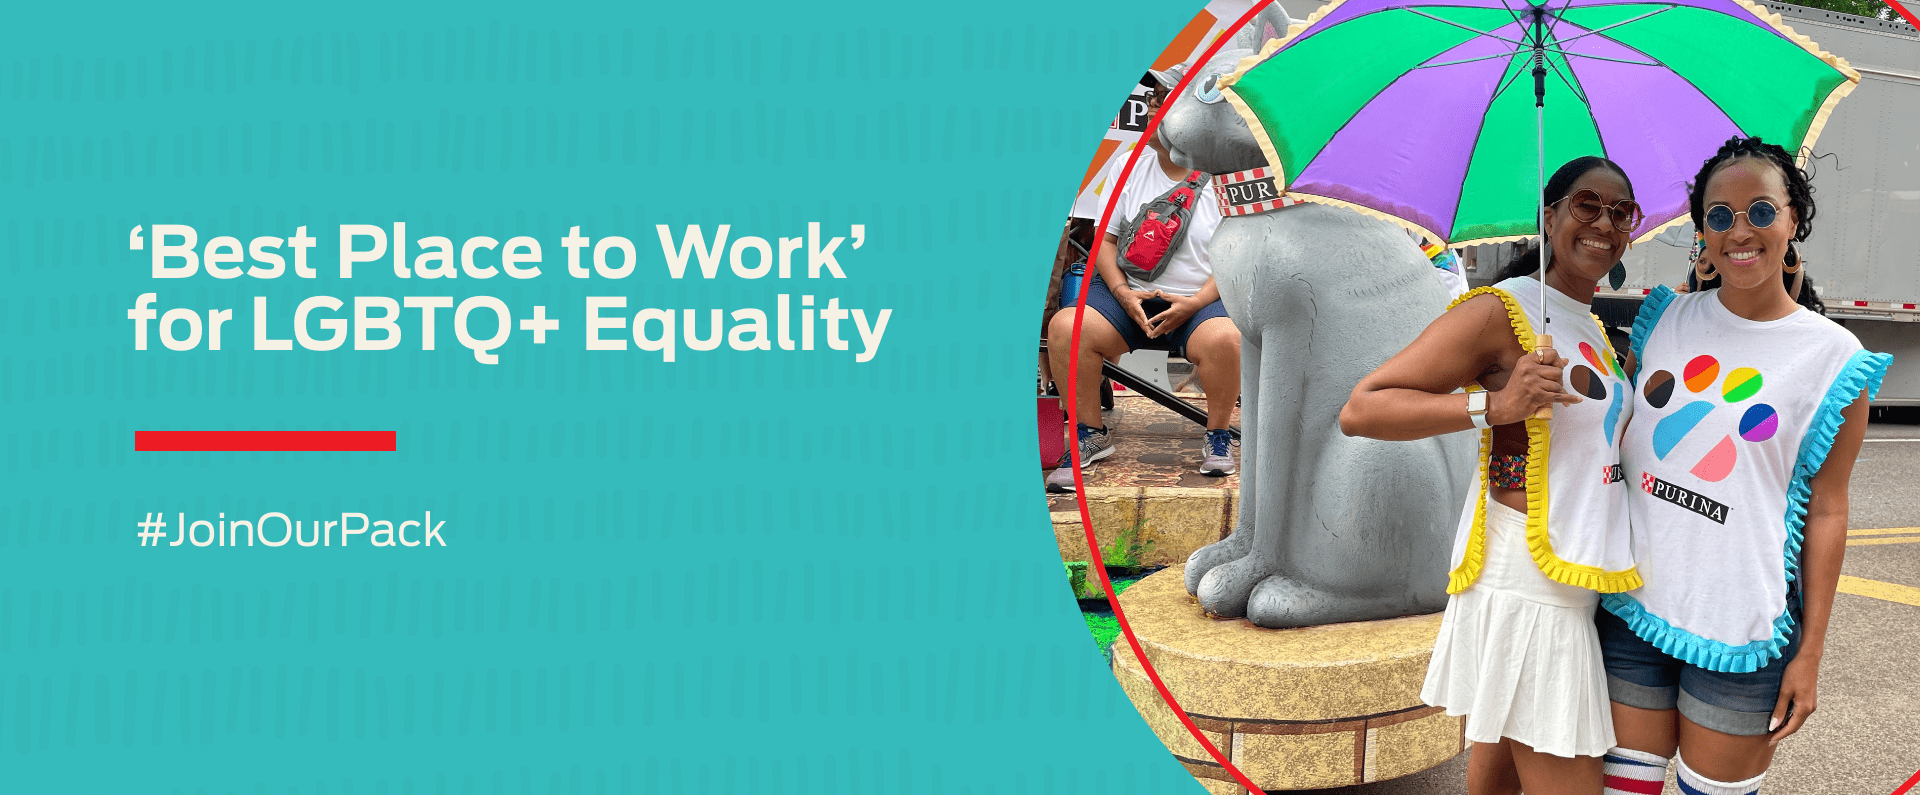 Nestlé Purina Named a ‘Best Place to Work’ for LGBTQ+ Equality 